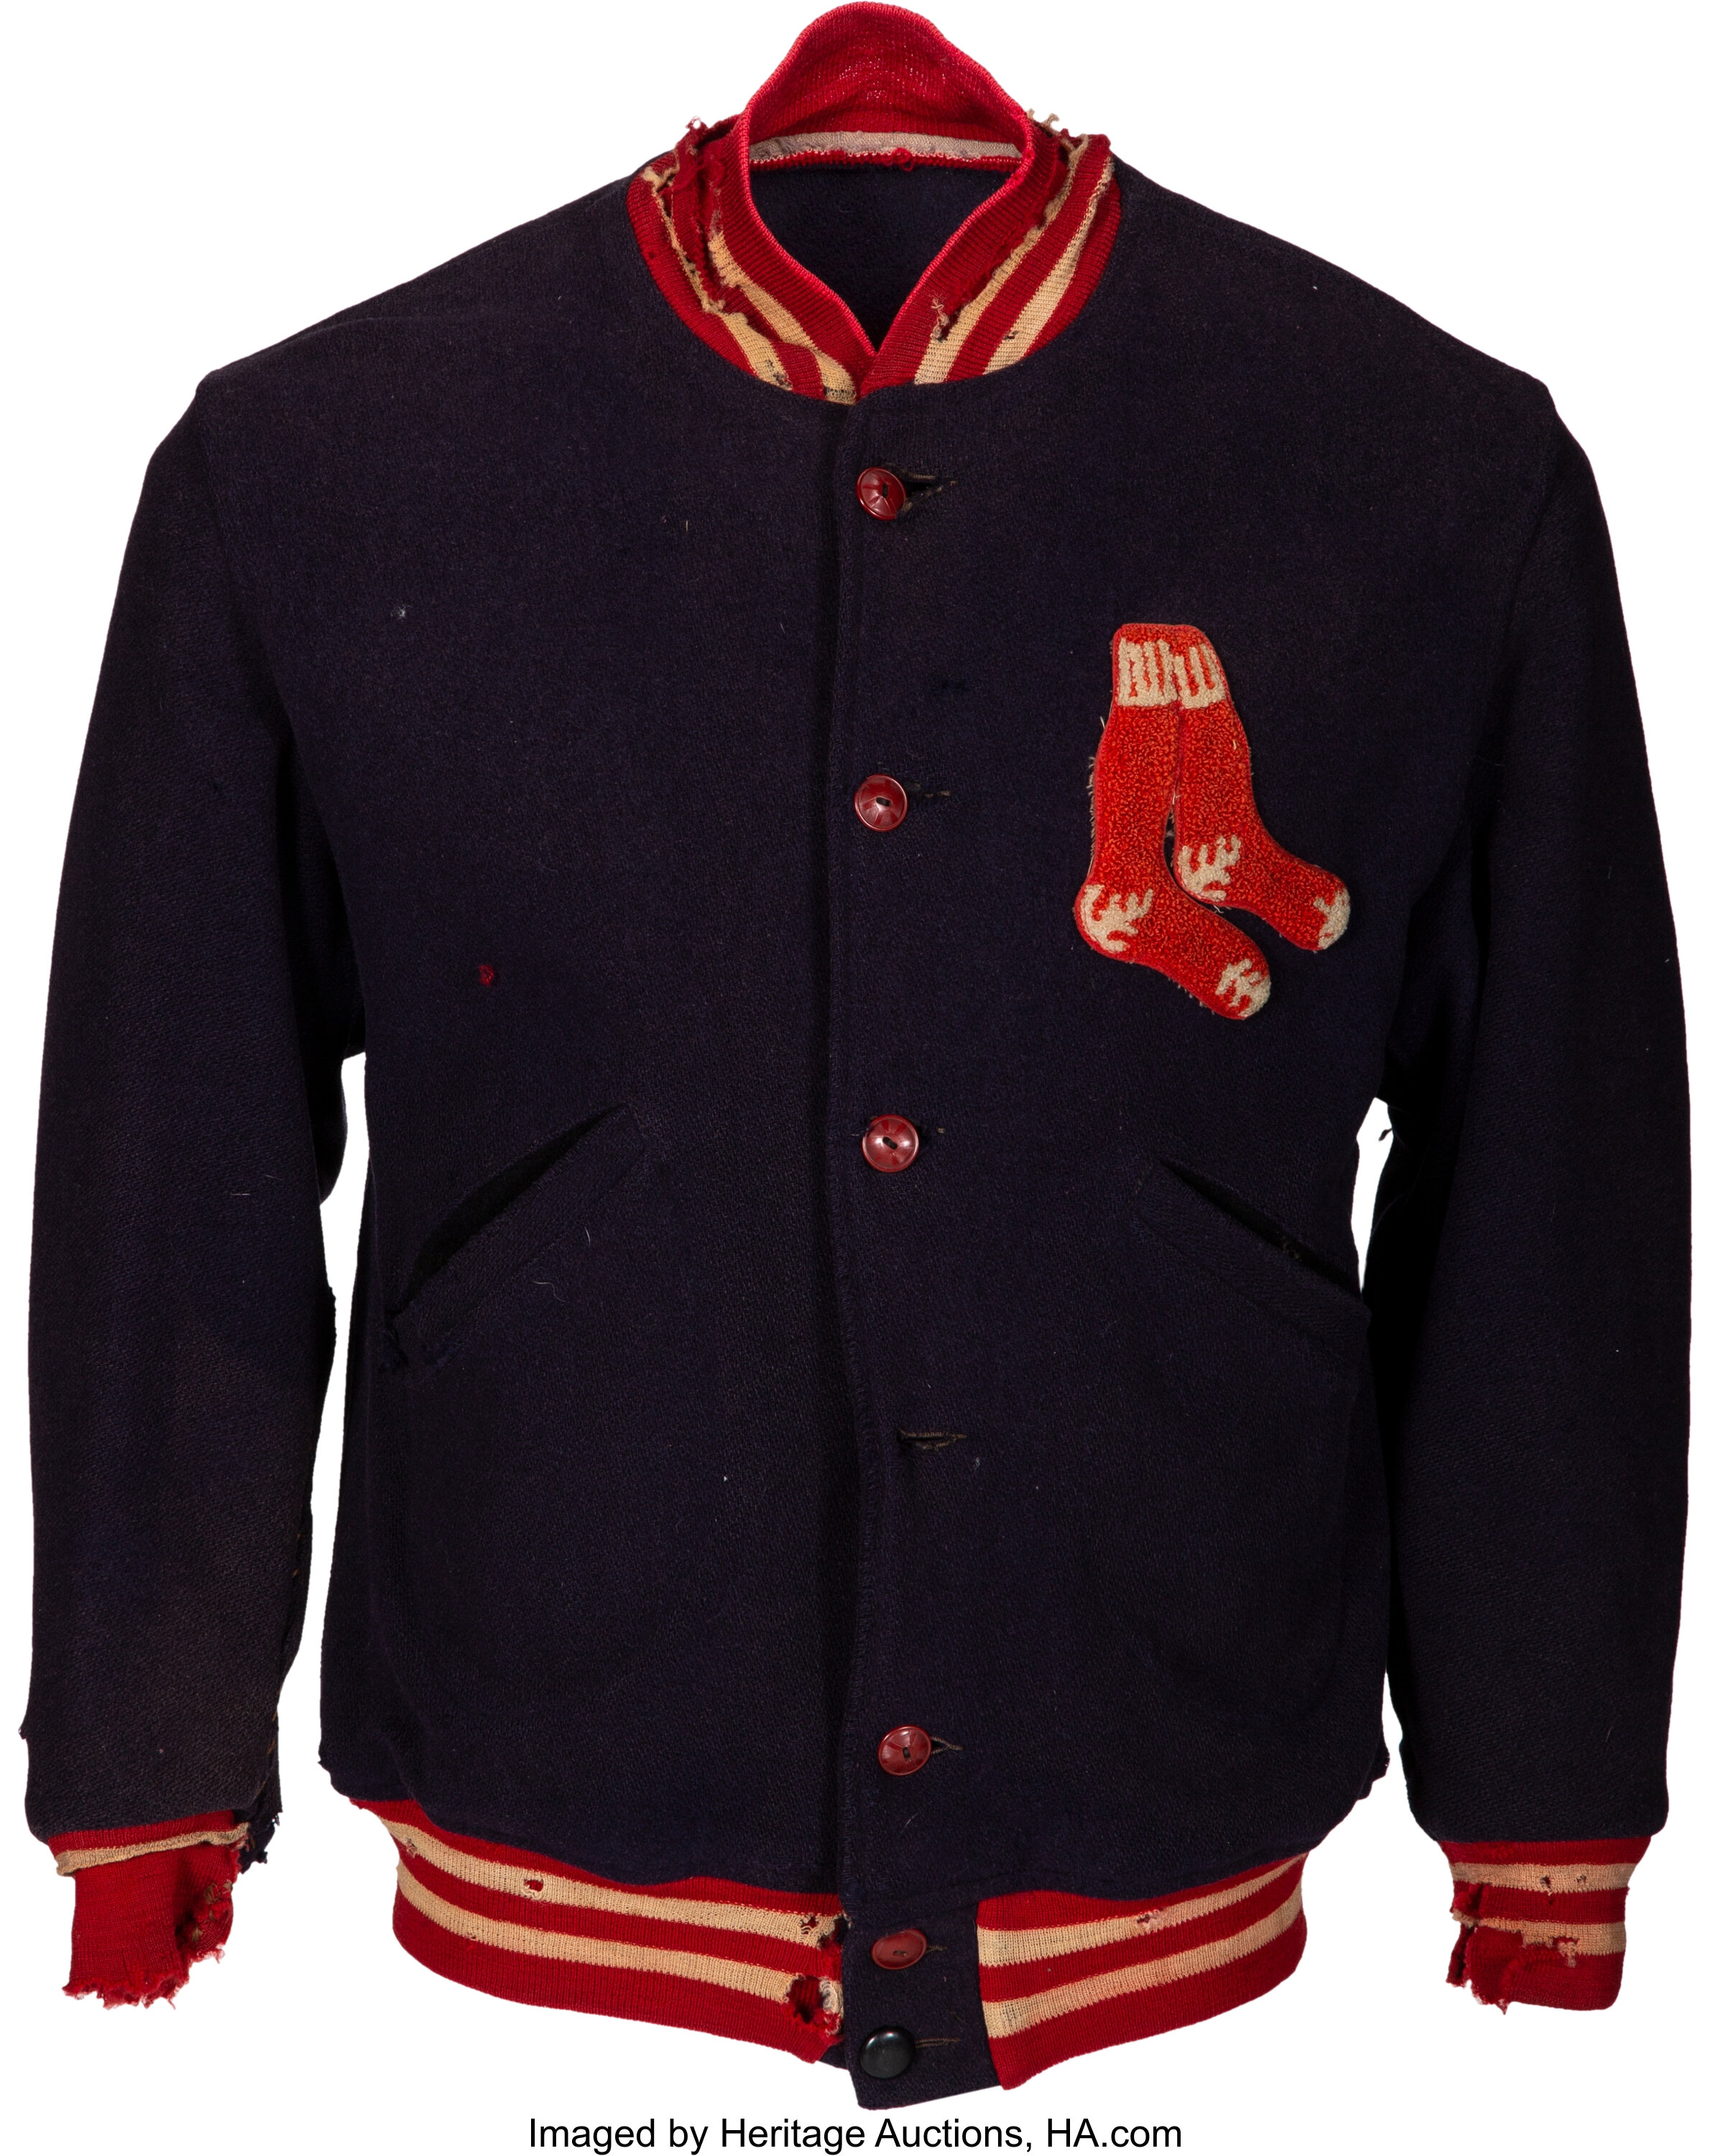 1946 Boston Red Sox Wool Jacket - Attributed to Ted Williams MVP ...